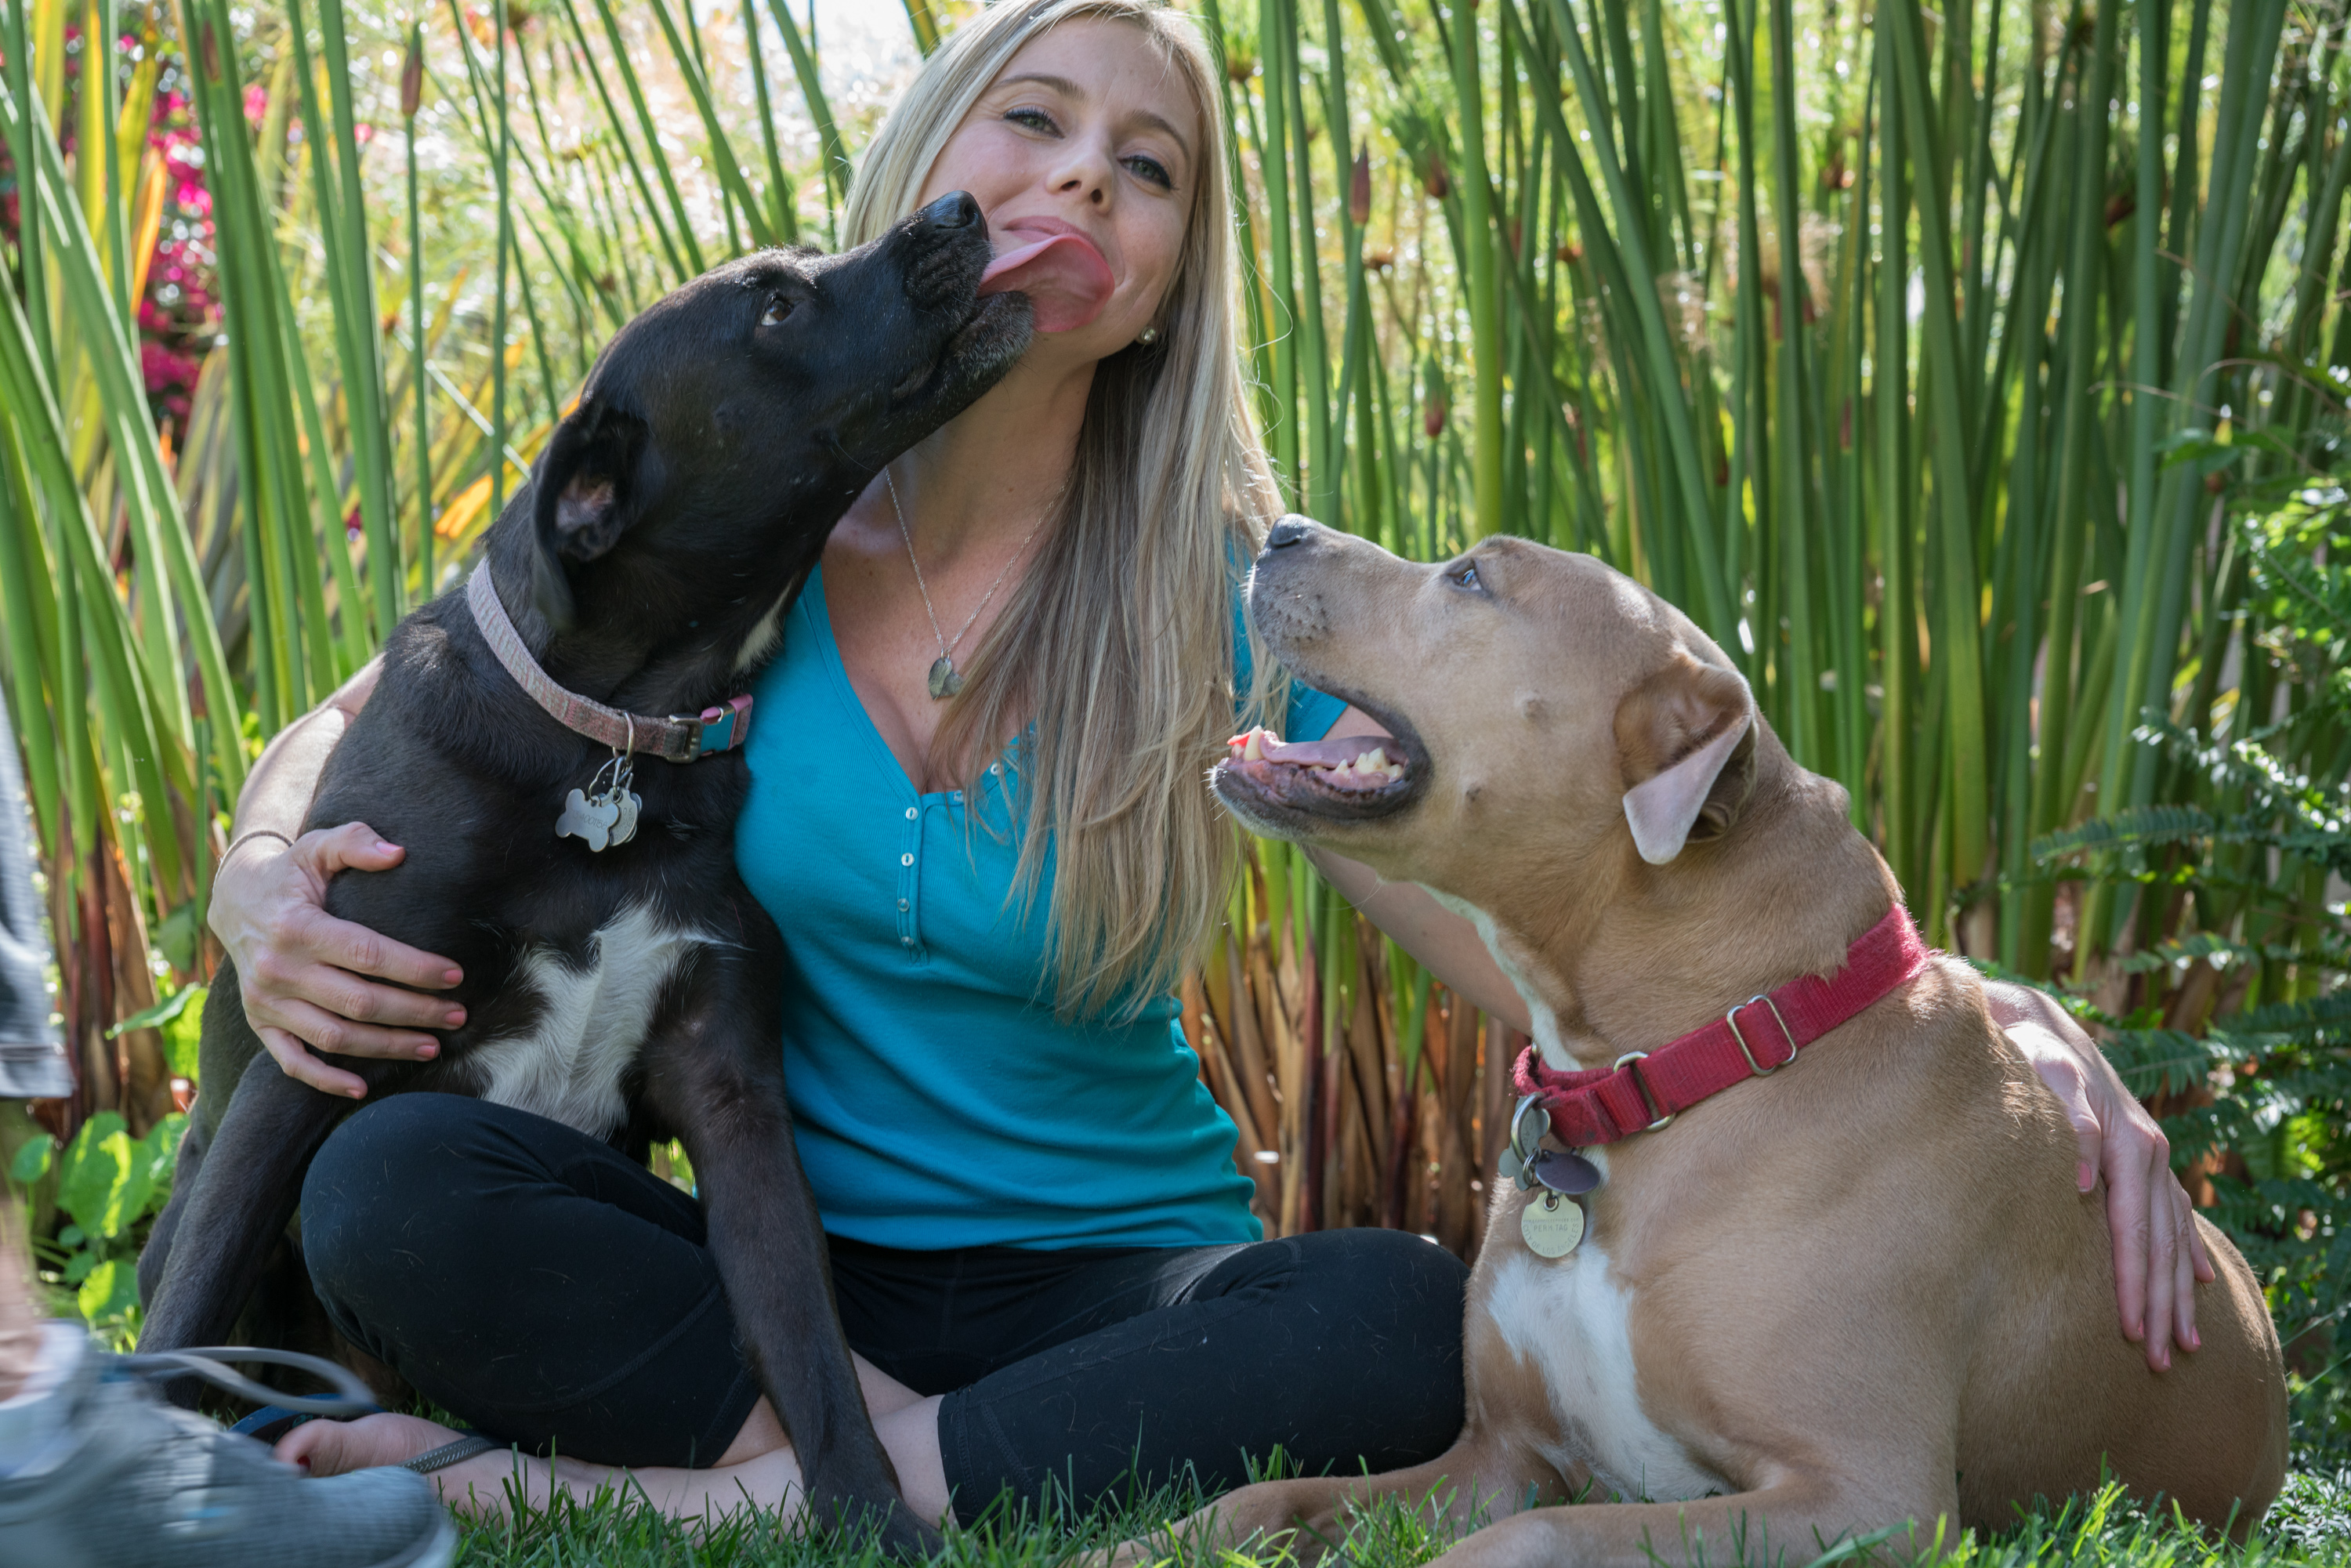 10 things I’ve learned from being a dog mom.